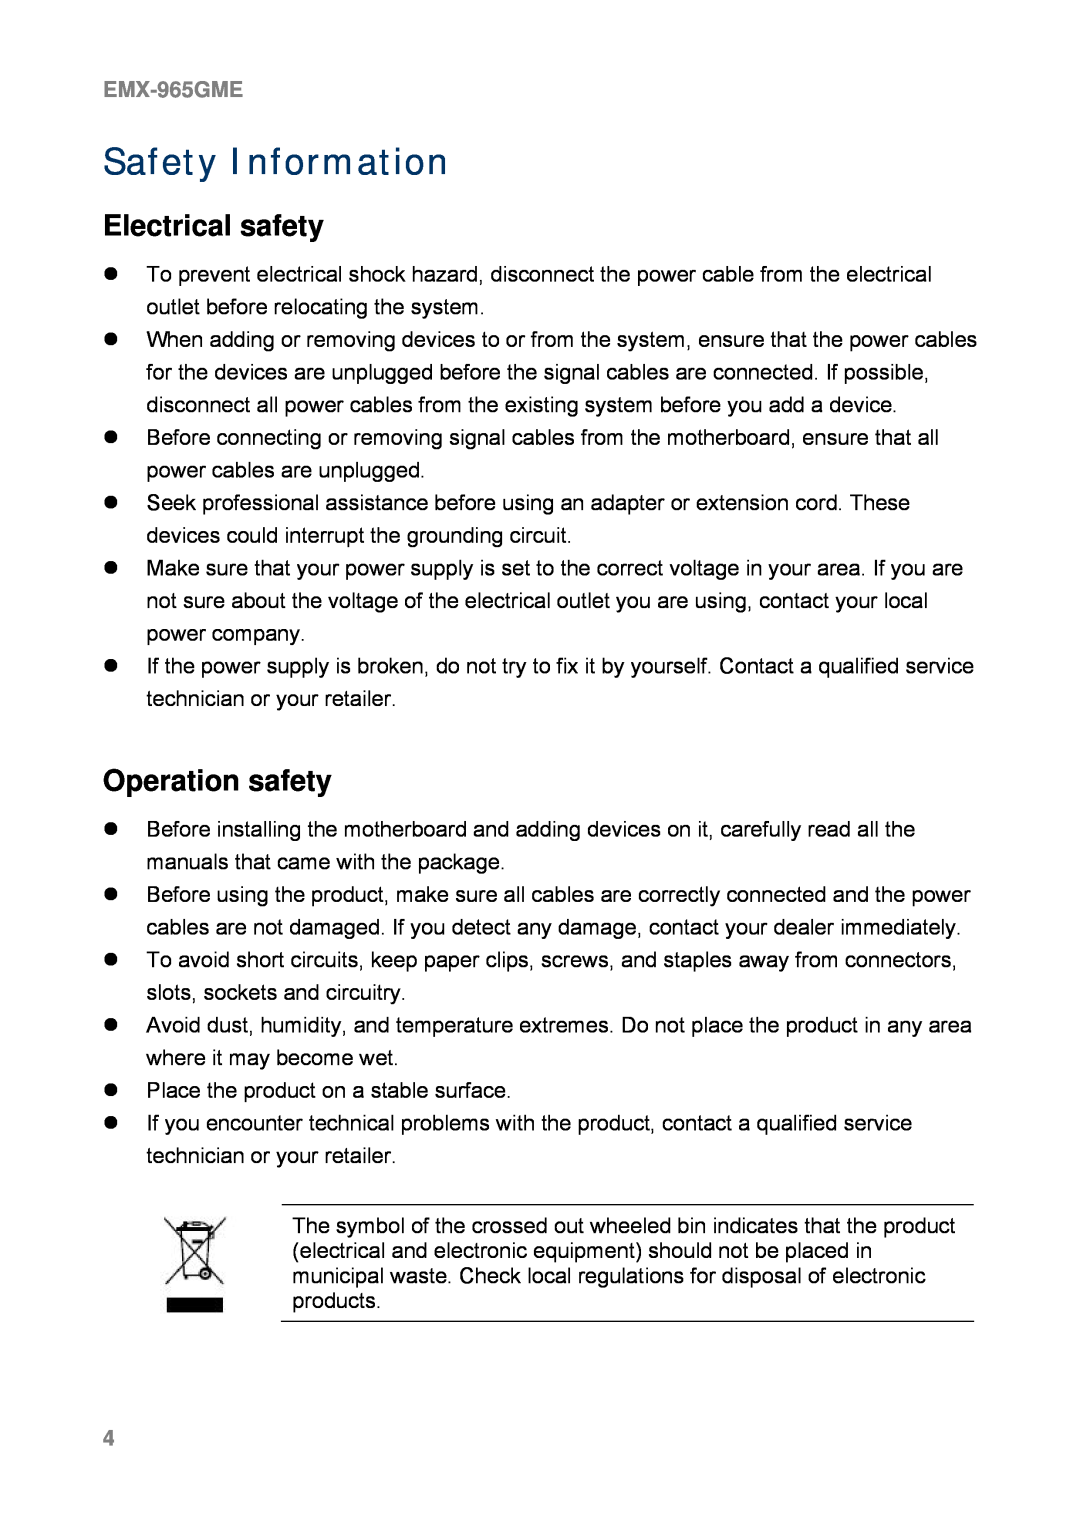 Intel EMX-965GME user manual Safety Information, Electrical safety, Operation safety 